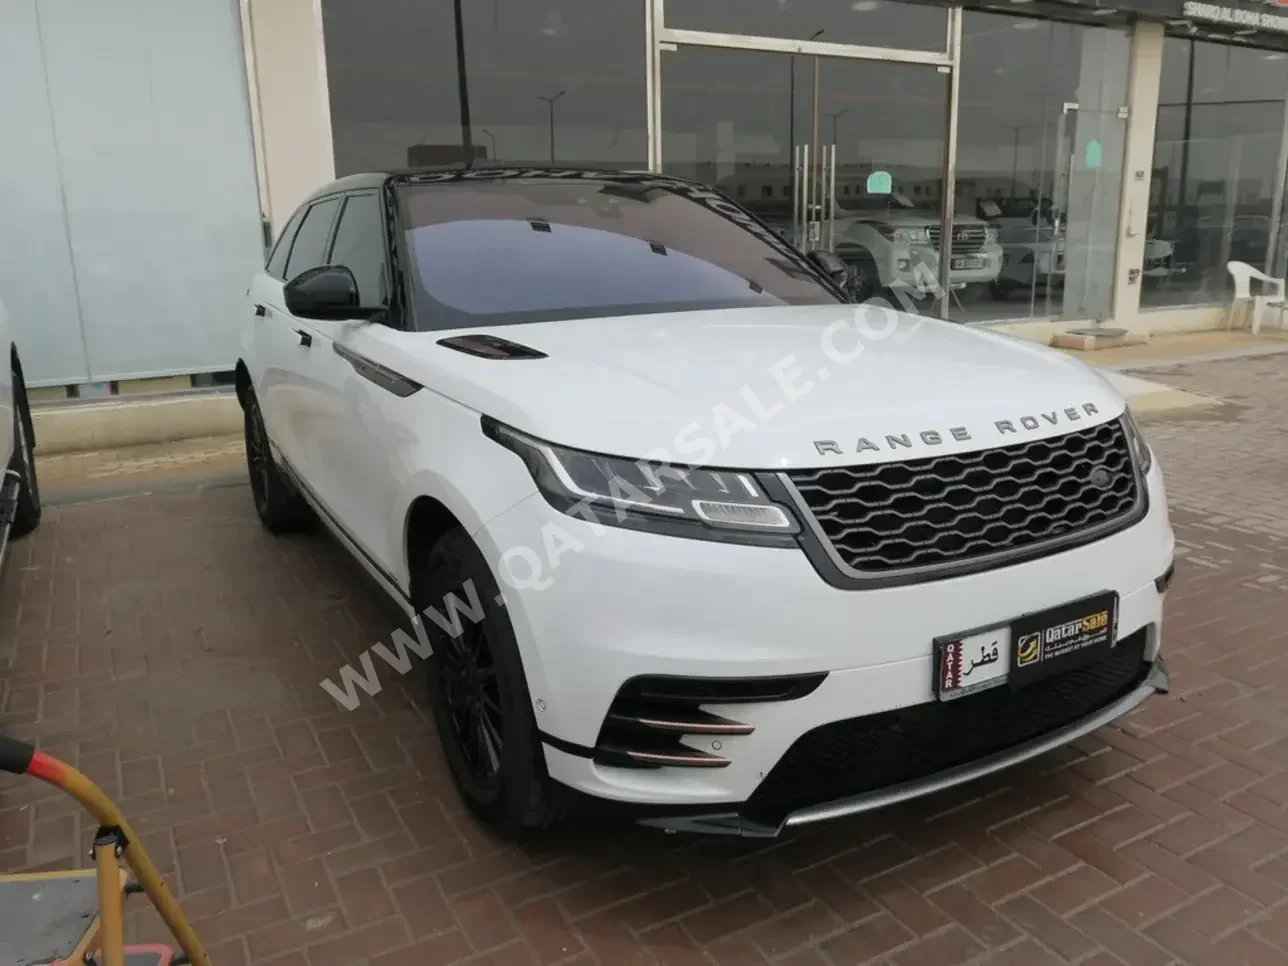 Land Rover  Range Rover  Velar  2018  Automatic  103,000 Km  4 Cylinder  Four Wheel Drive (4WD)  SUV  White